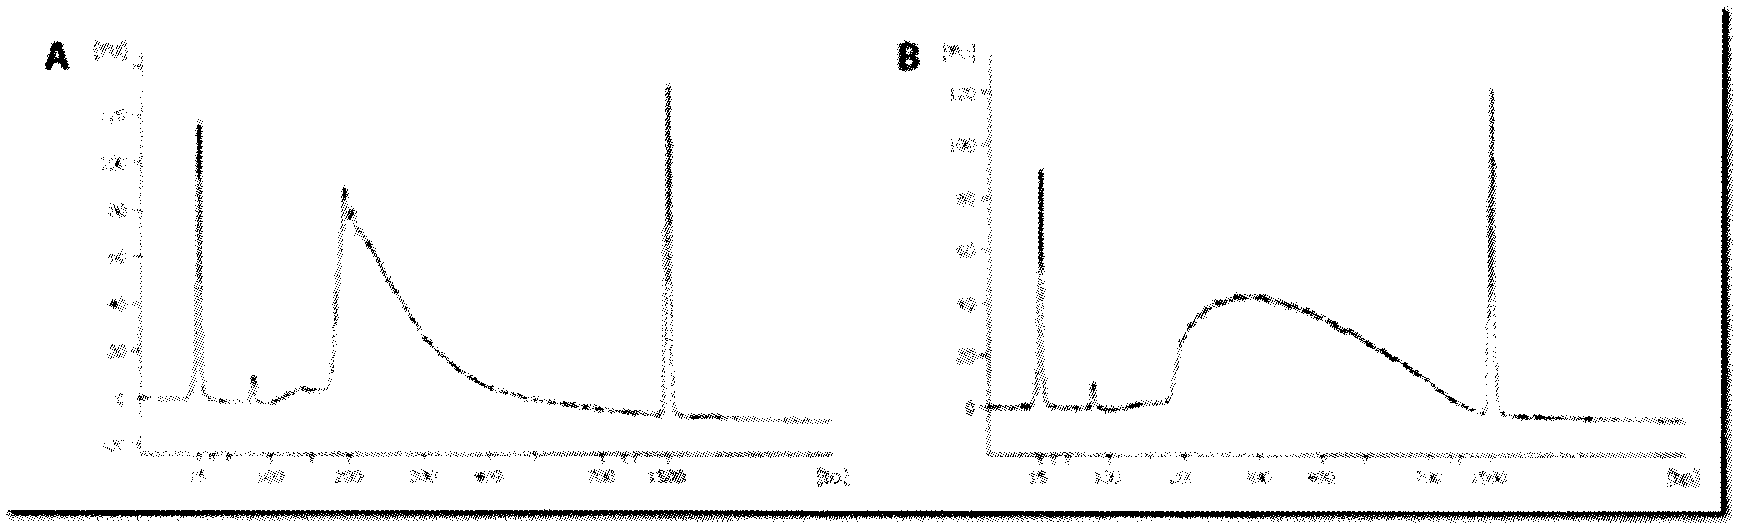 Method for constructing a nucleic acid library, reagent and kit